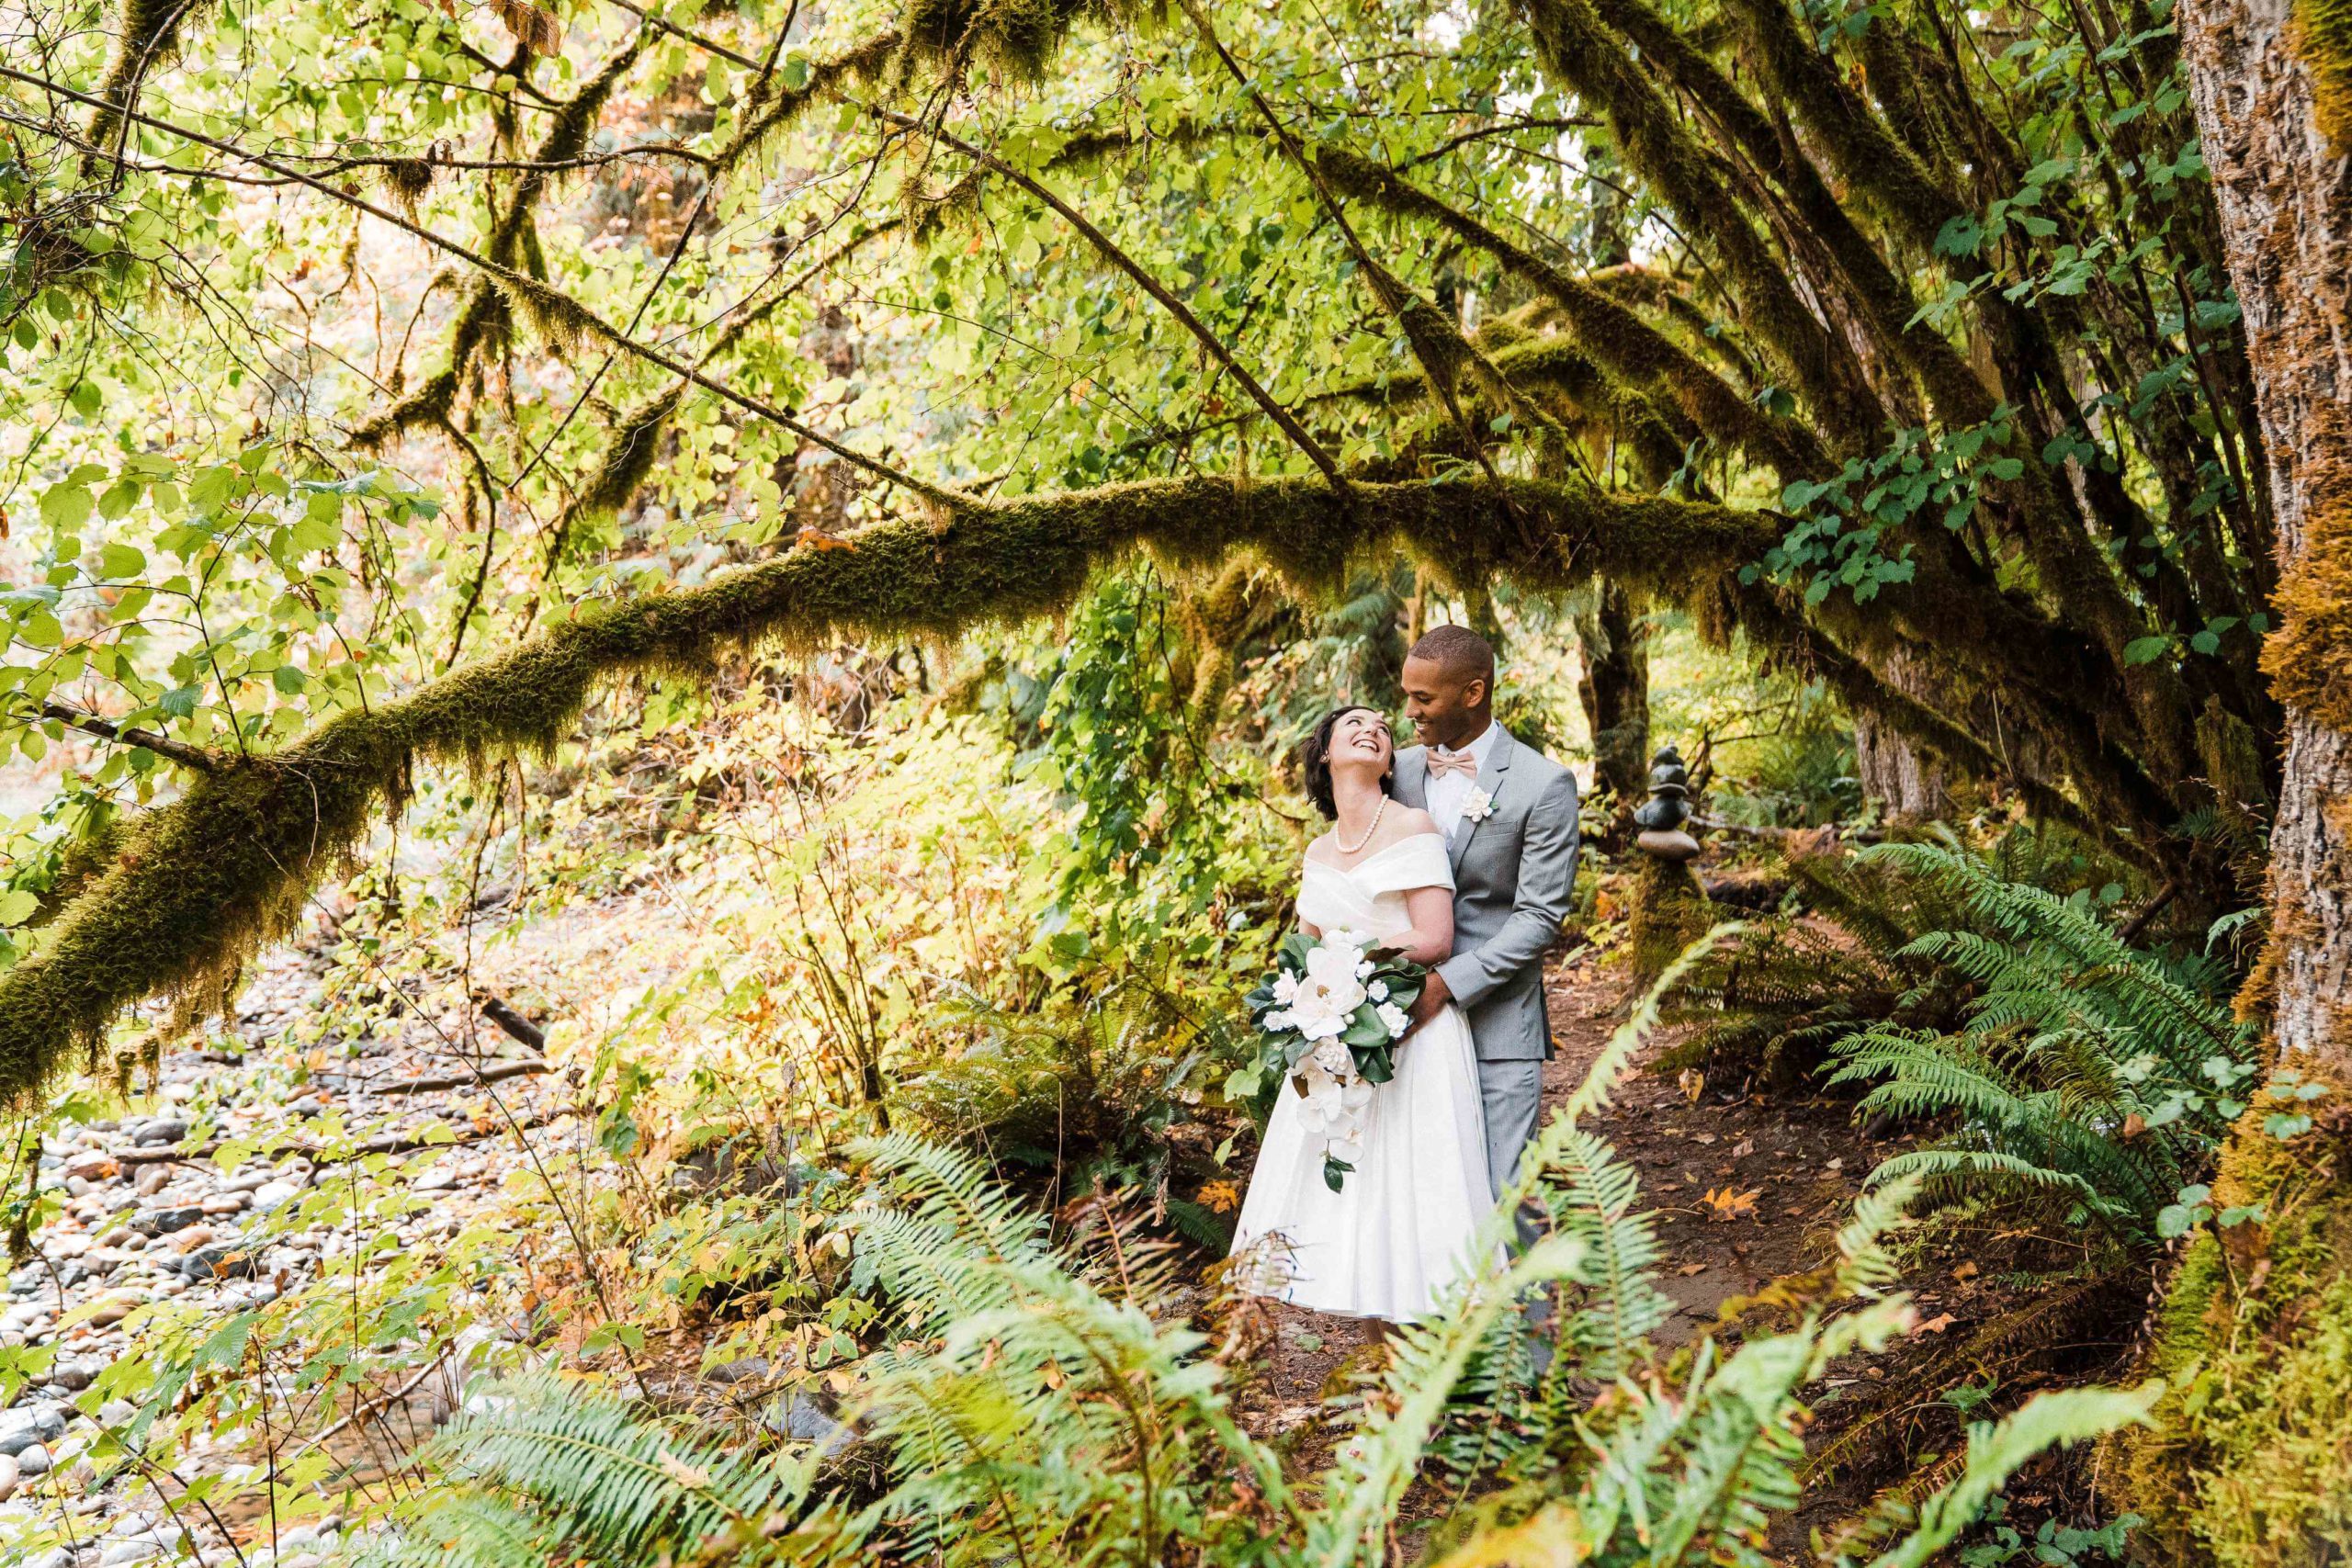 Bride and groom embracing in the forest for their couple photos